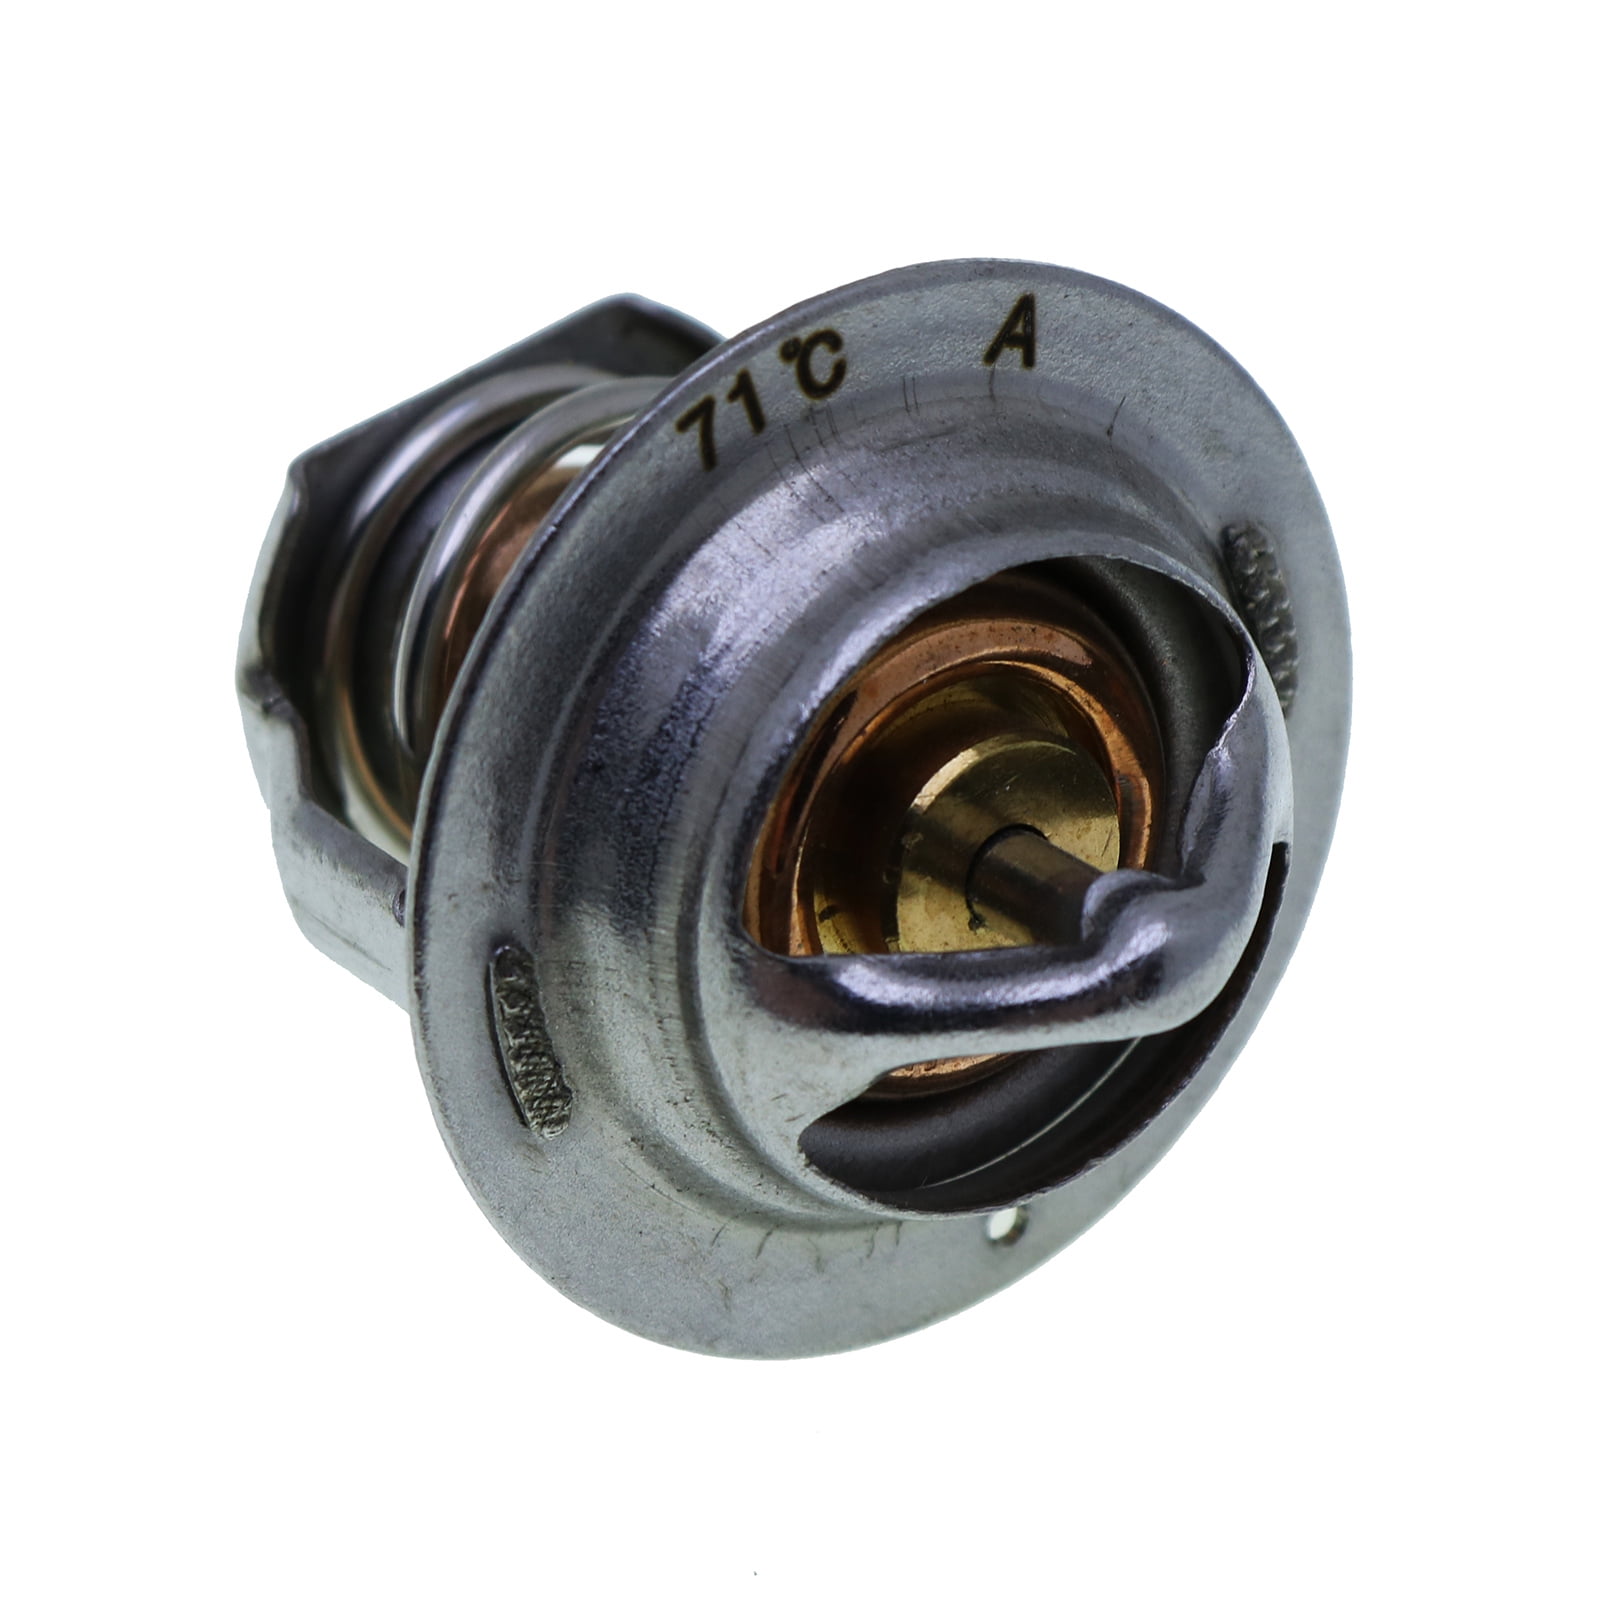 Thermostat 6653948 6674172 for Bobcat 773 751 T190 S175 S150 763 S185 S130  S160 7753 753